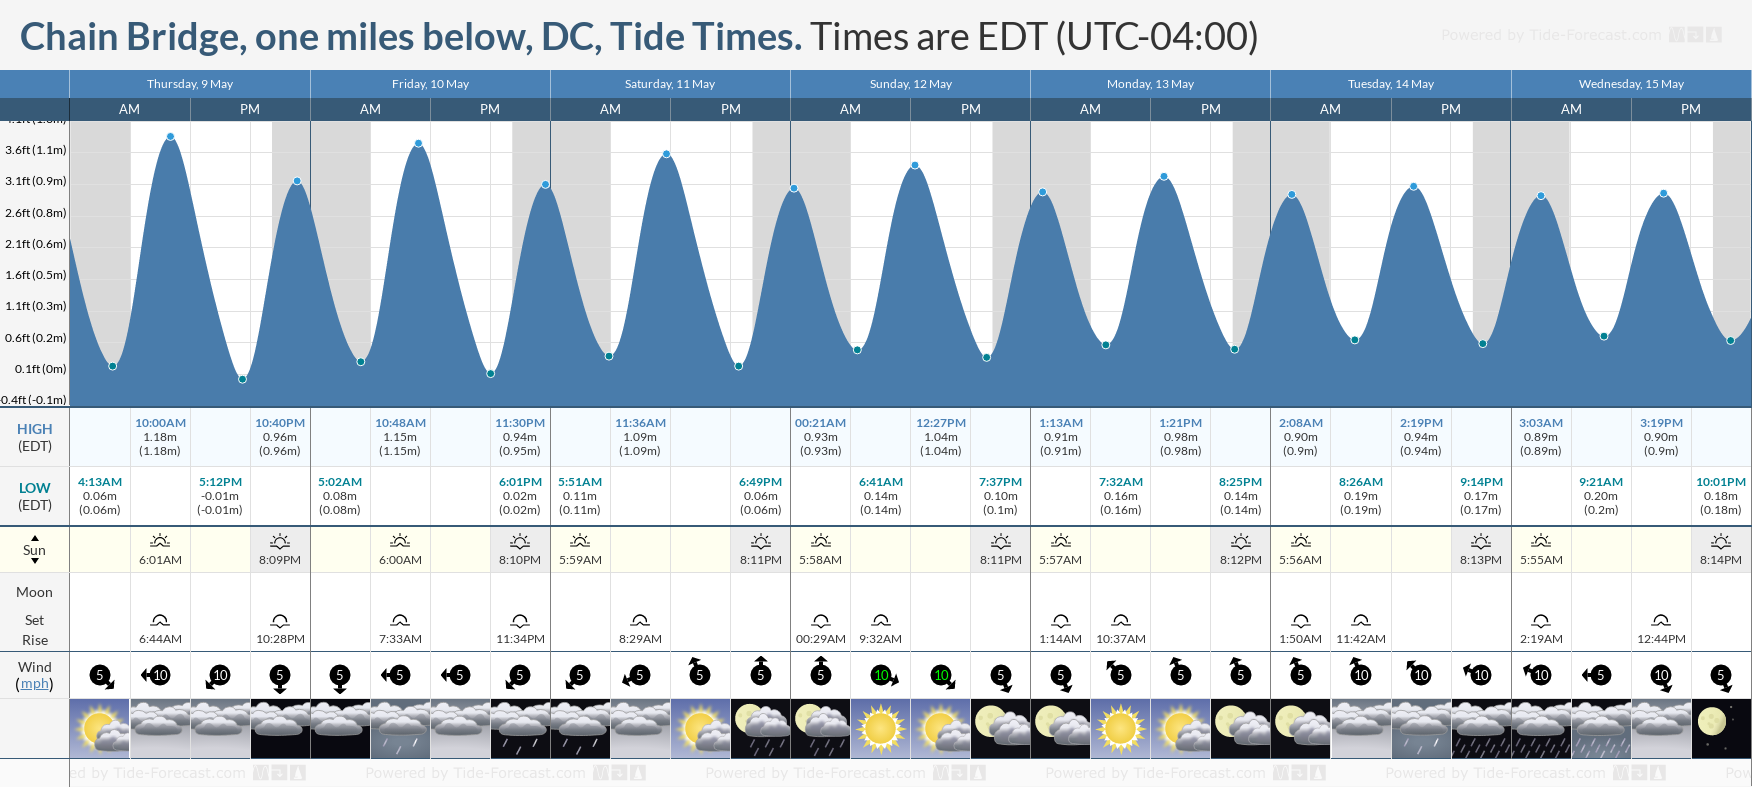 Chain Bridge, one miles below, DC Tide Chart including high and low tide times for the next 7 days